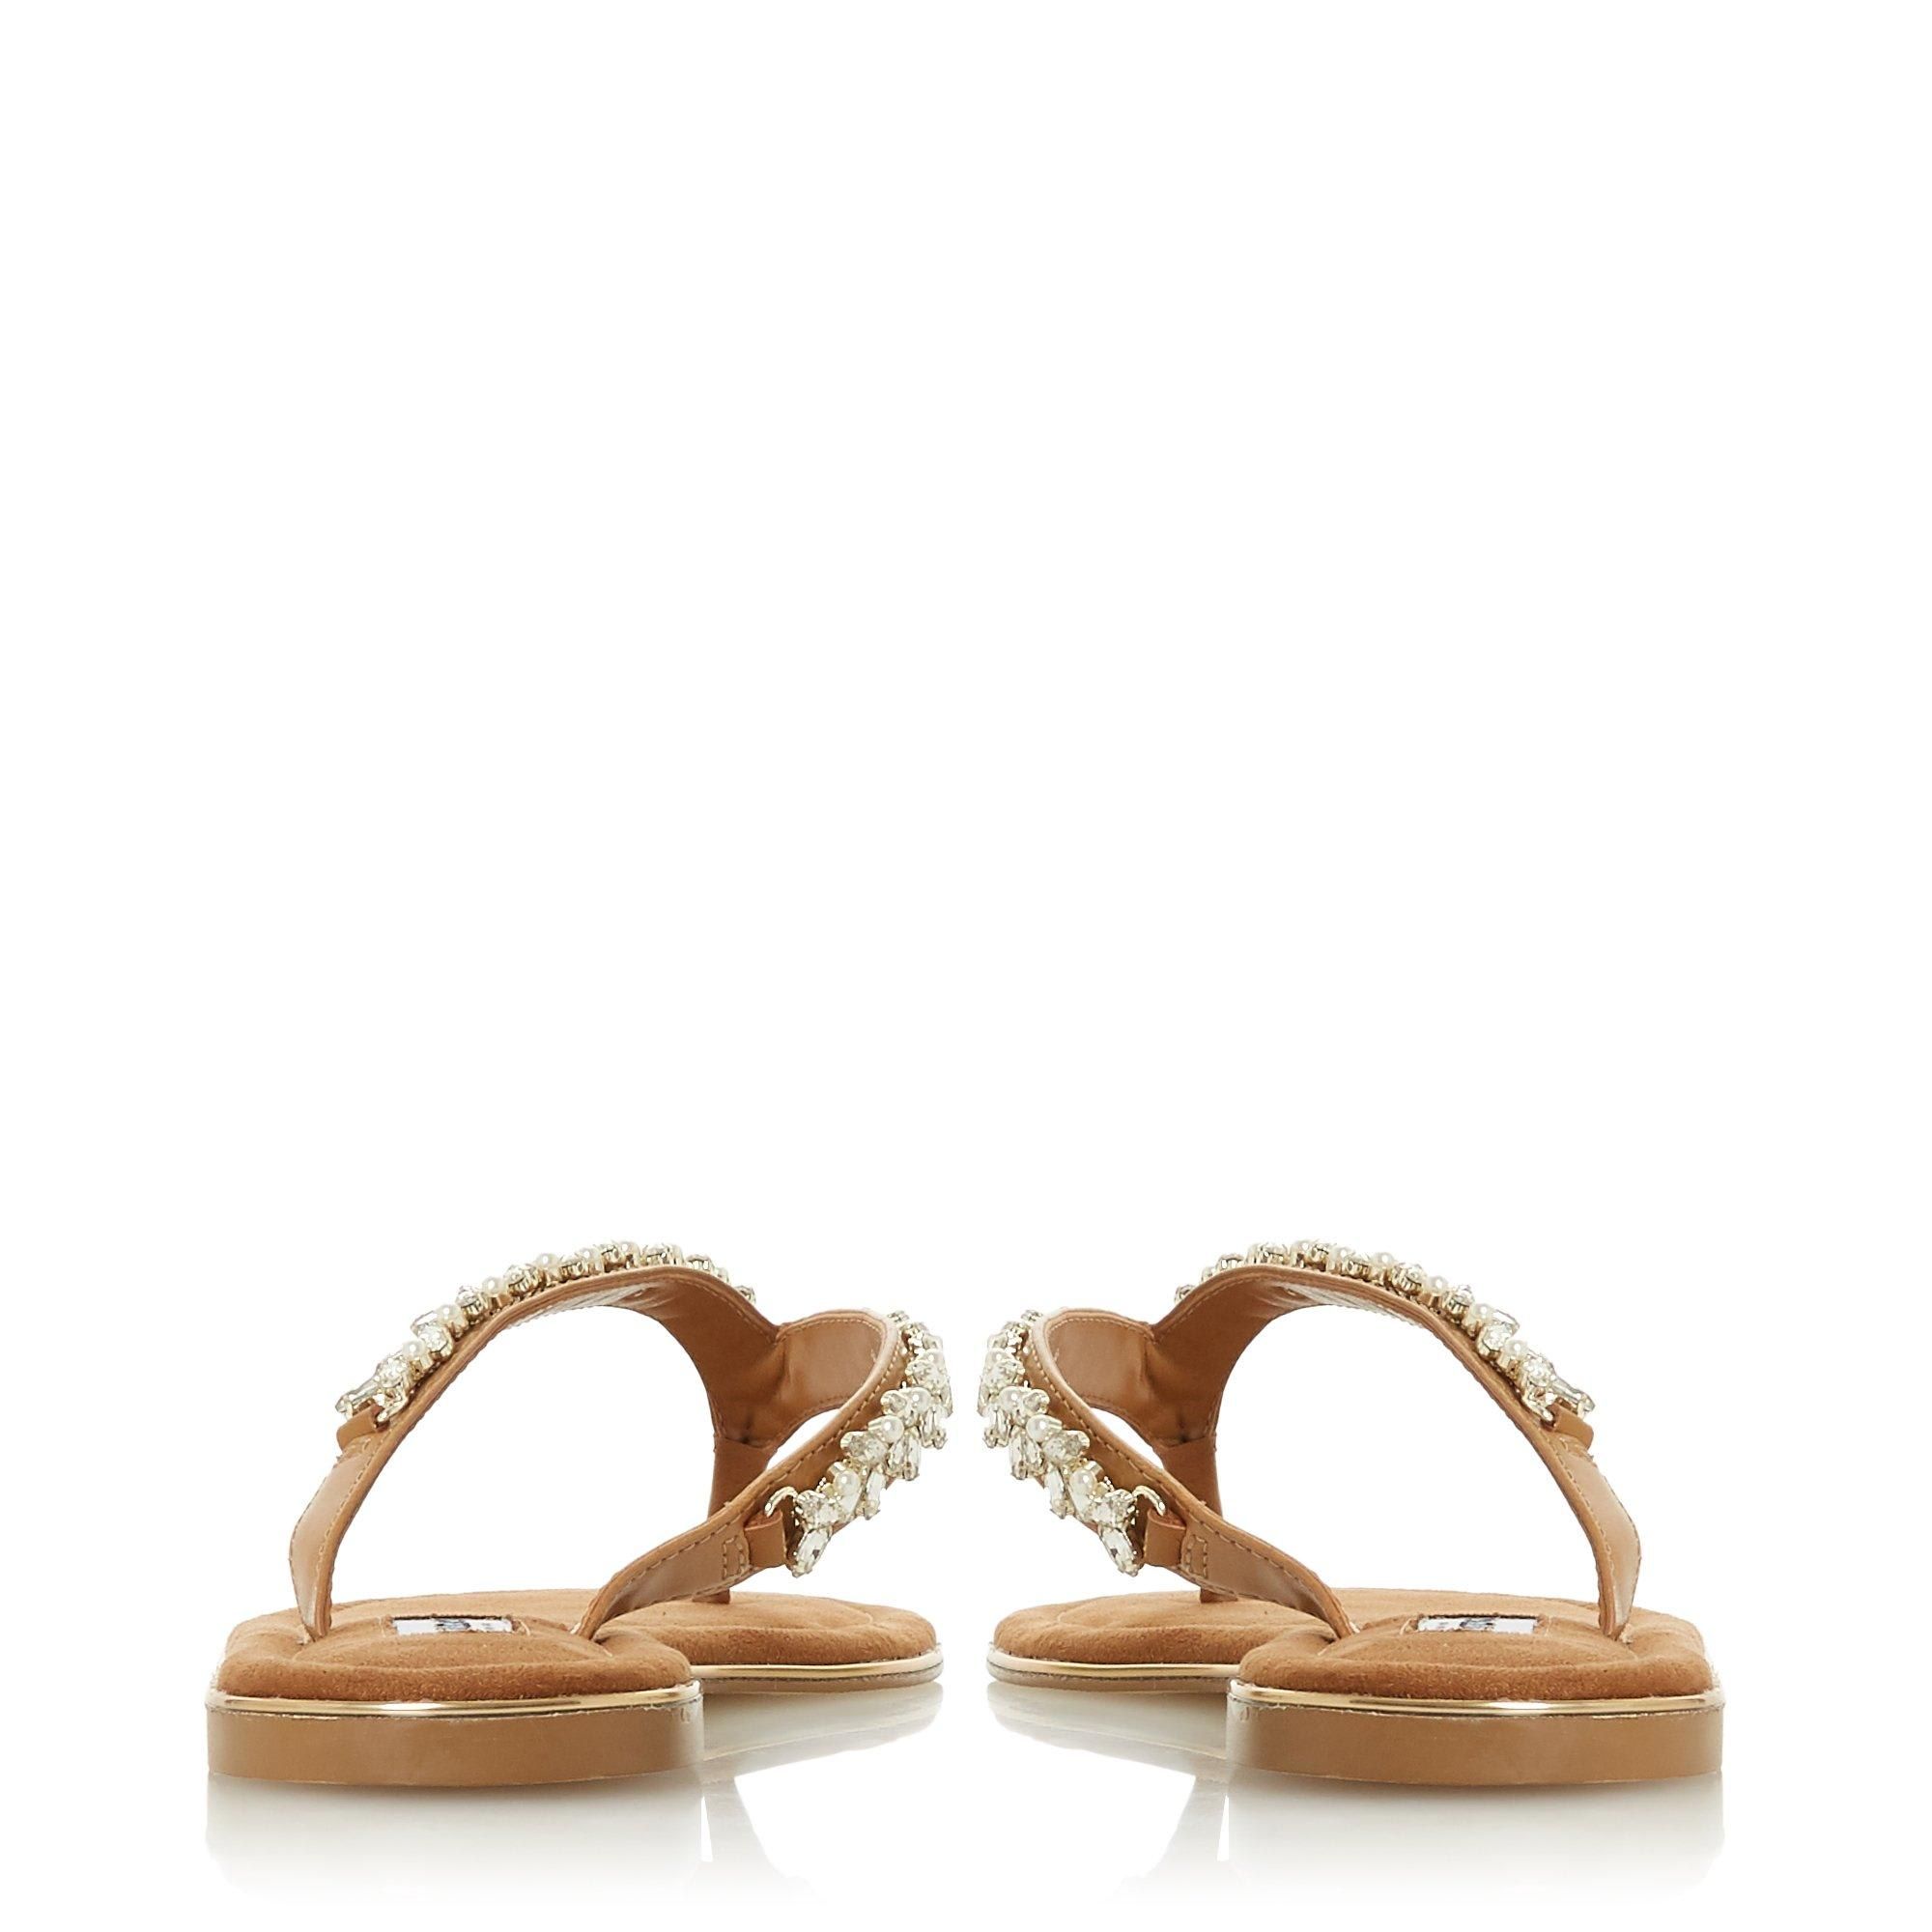 The Newbeys sandal will become your daily companion in the summer months. Fitted with a jewel-embossed toe post for a hint of glamour. It's finished with a shimmering contrasting rim at the sole.